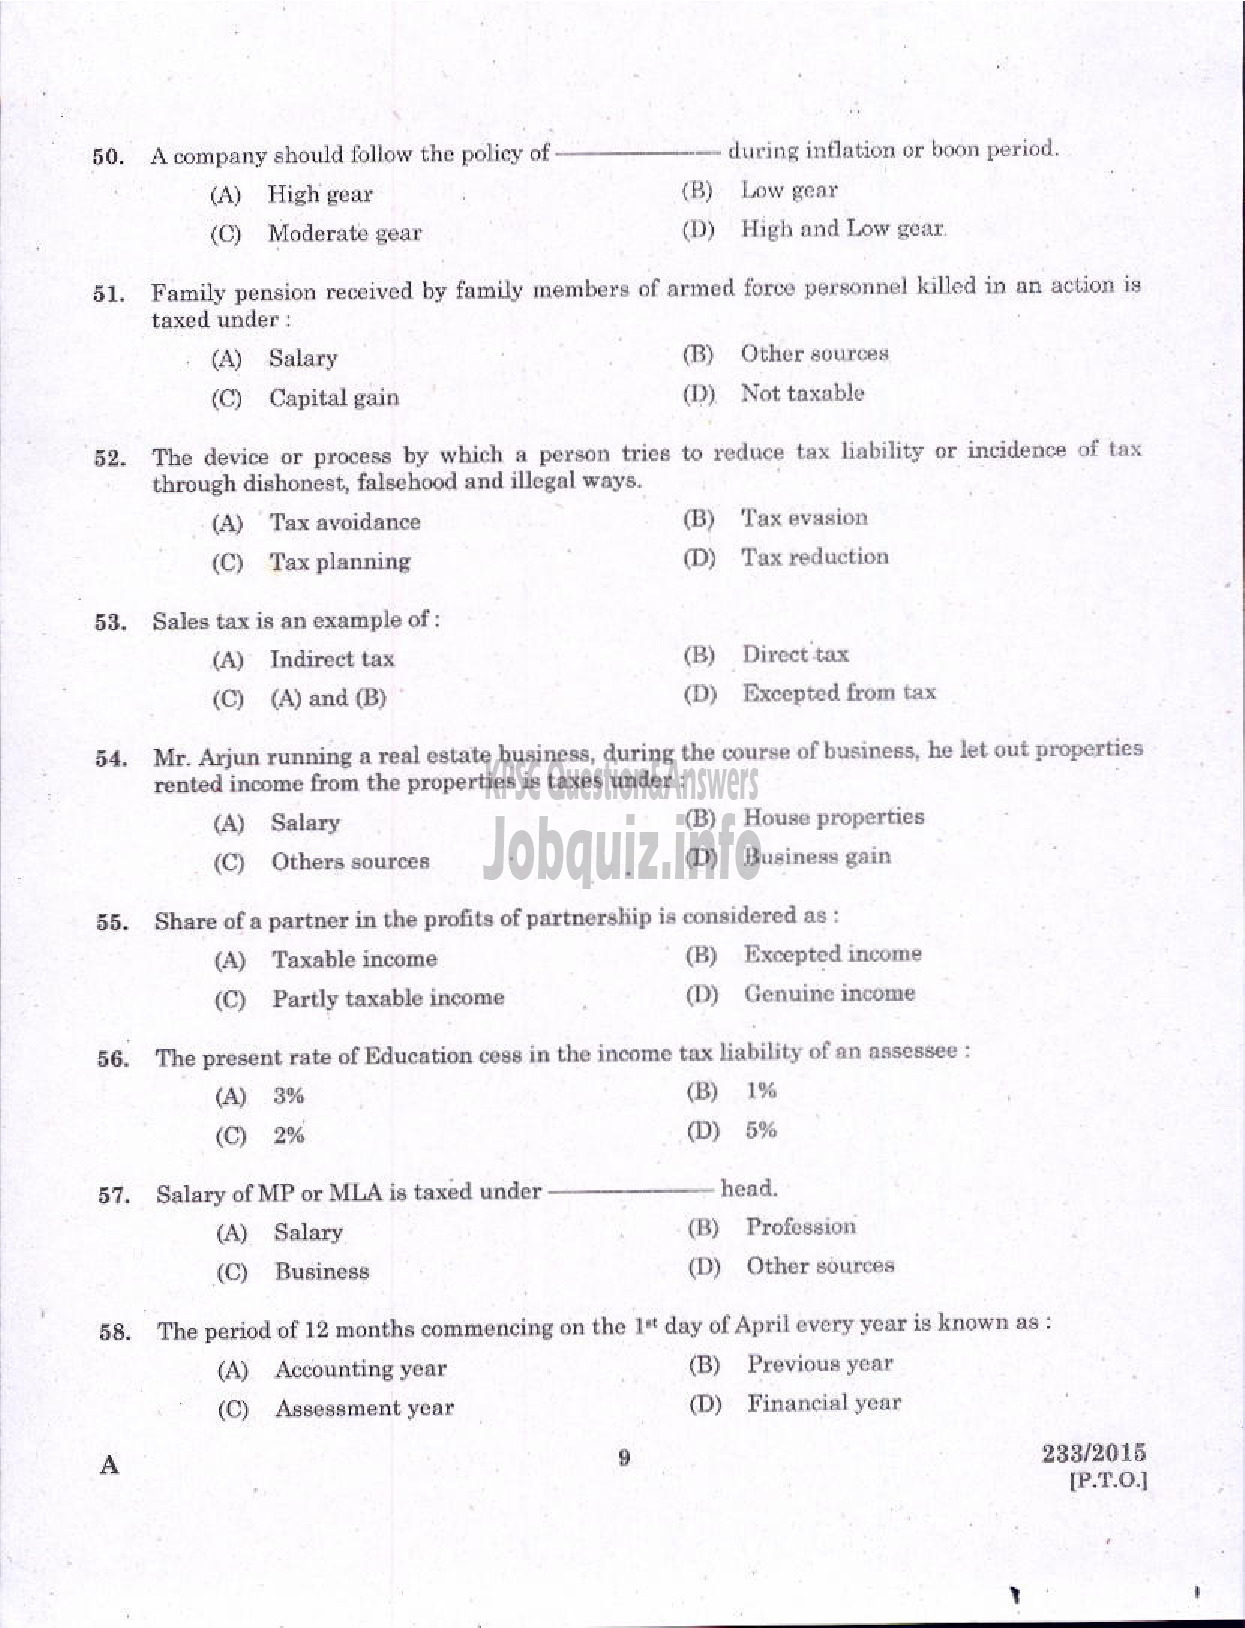 Kerala PSC Question Paper - LECTURER IN COMMERCE TECHNICAL EDUCATION-7